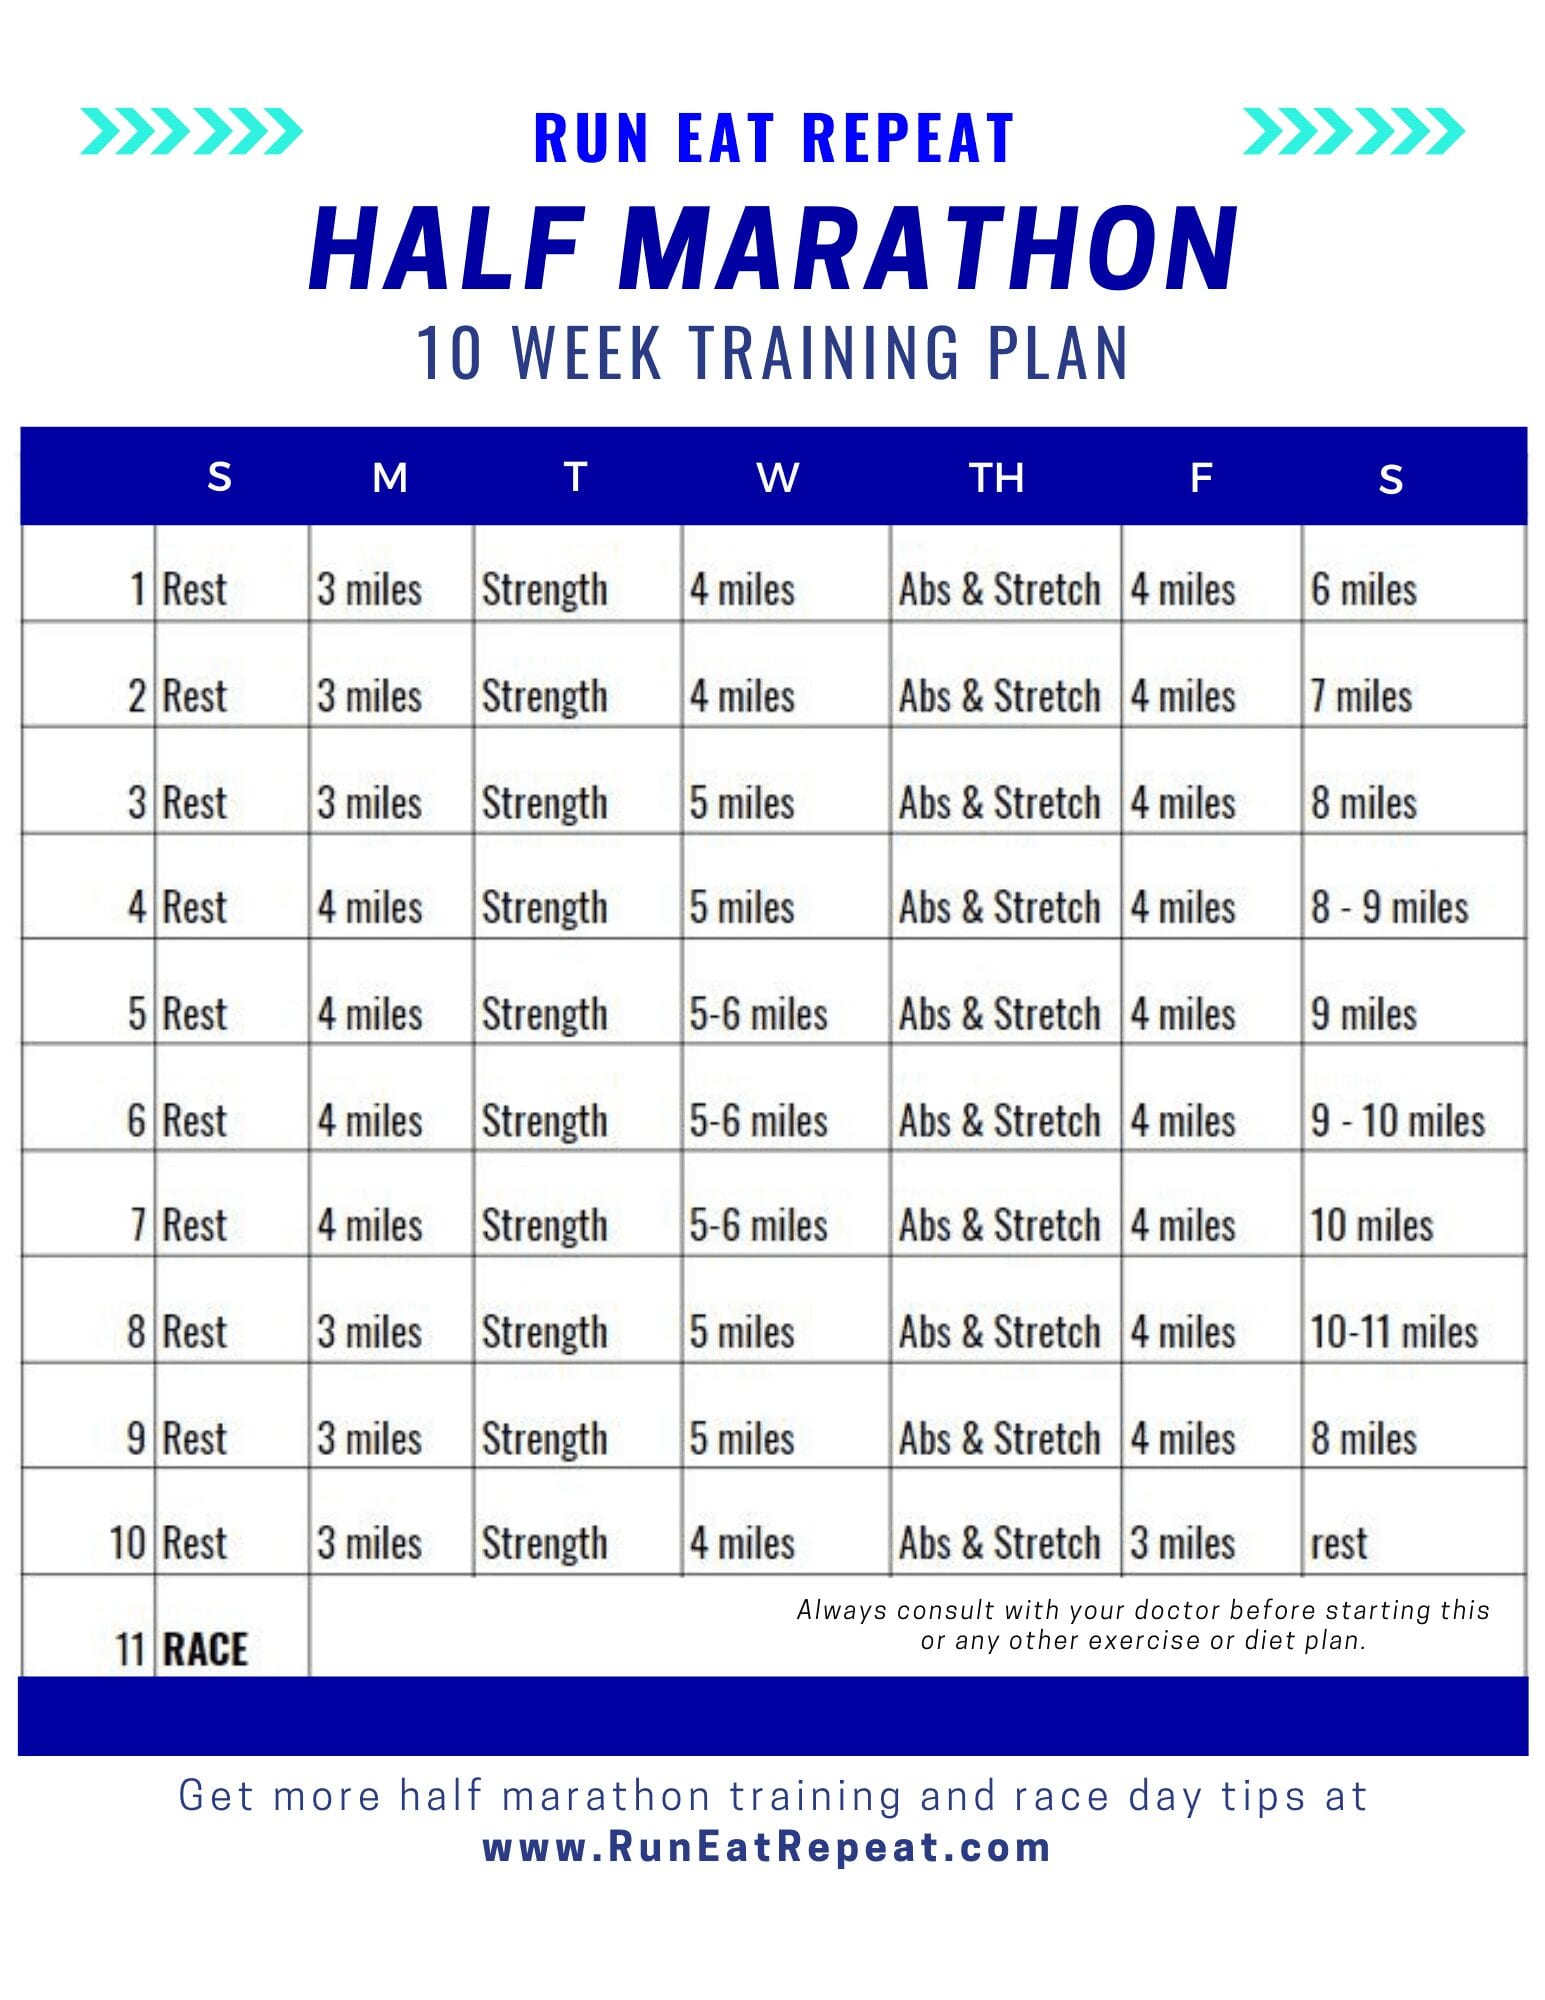 Half Marathon in 10 Weeks Training Plan and Race Packing List and Tips -  Run Eat Repeat